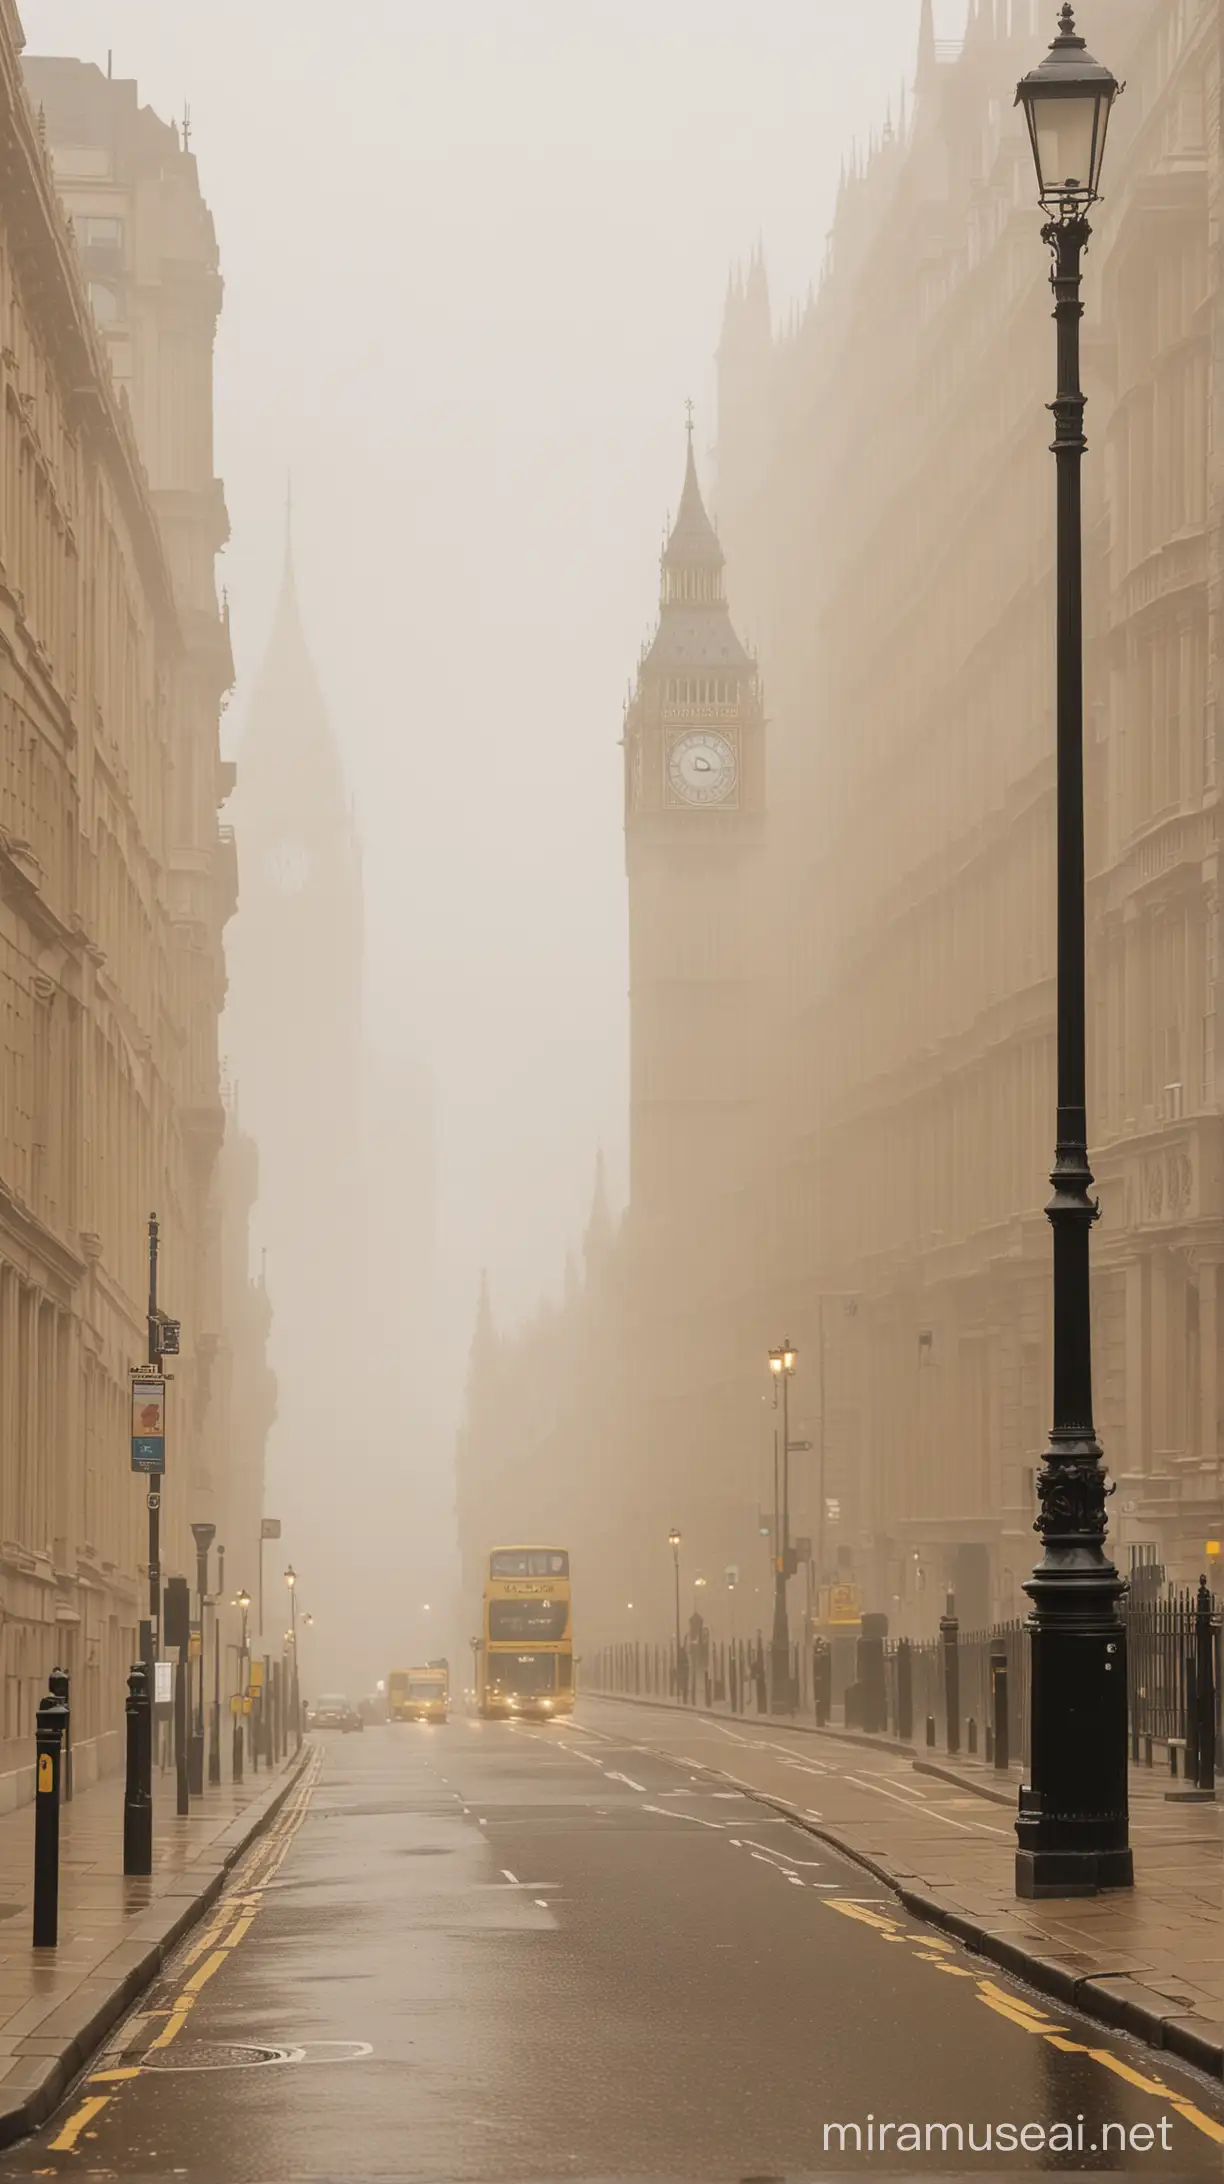 a street in london with the big ben in the background, the street is covered in fog with shades of yellow and beige